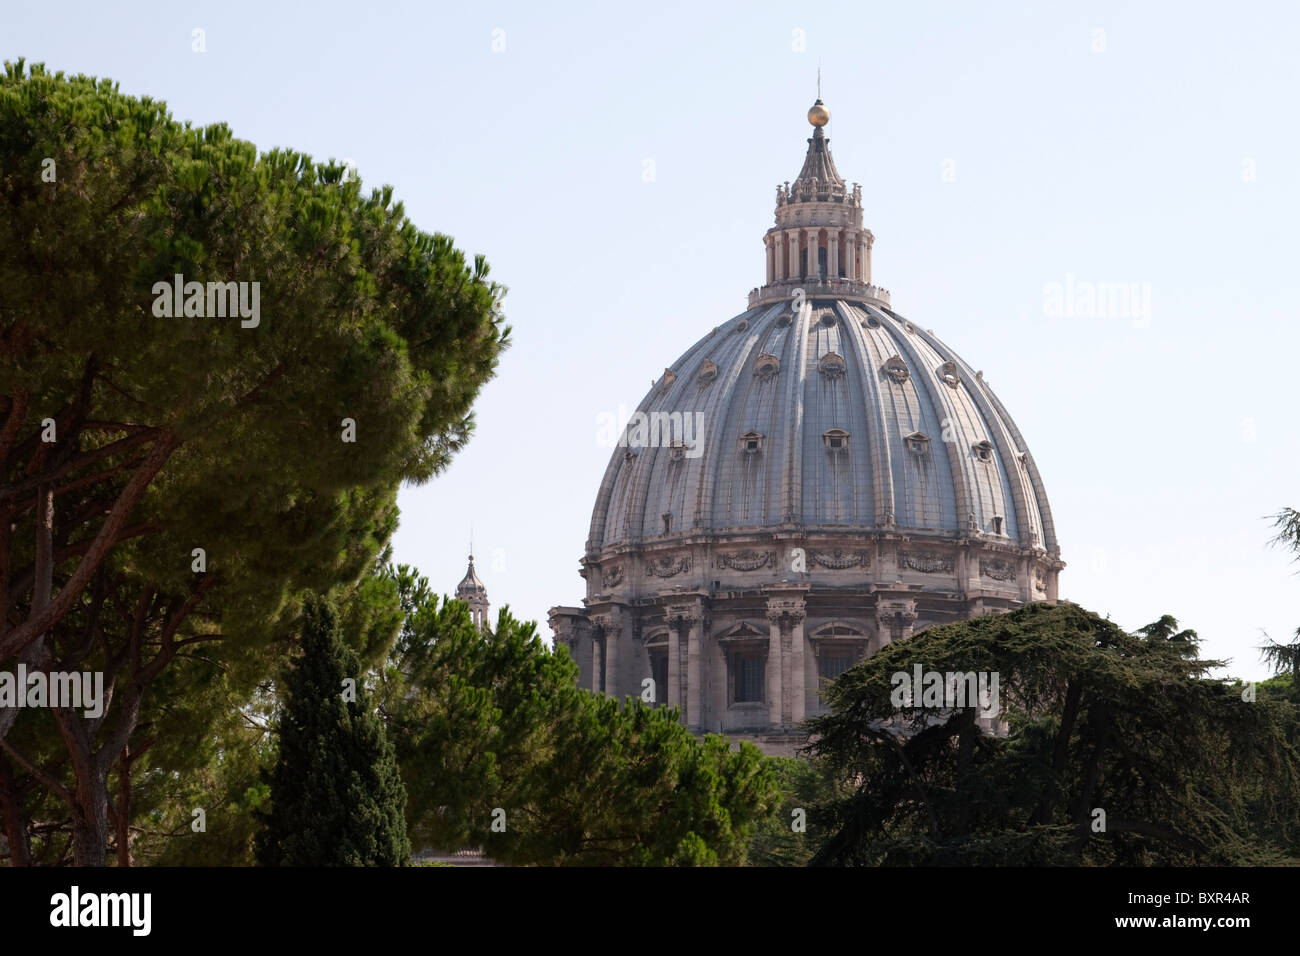 The Dome of St. Peter's Basilica seen through the trees in the Vatican City, Rome Stock Photo